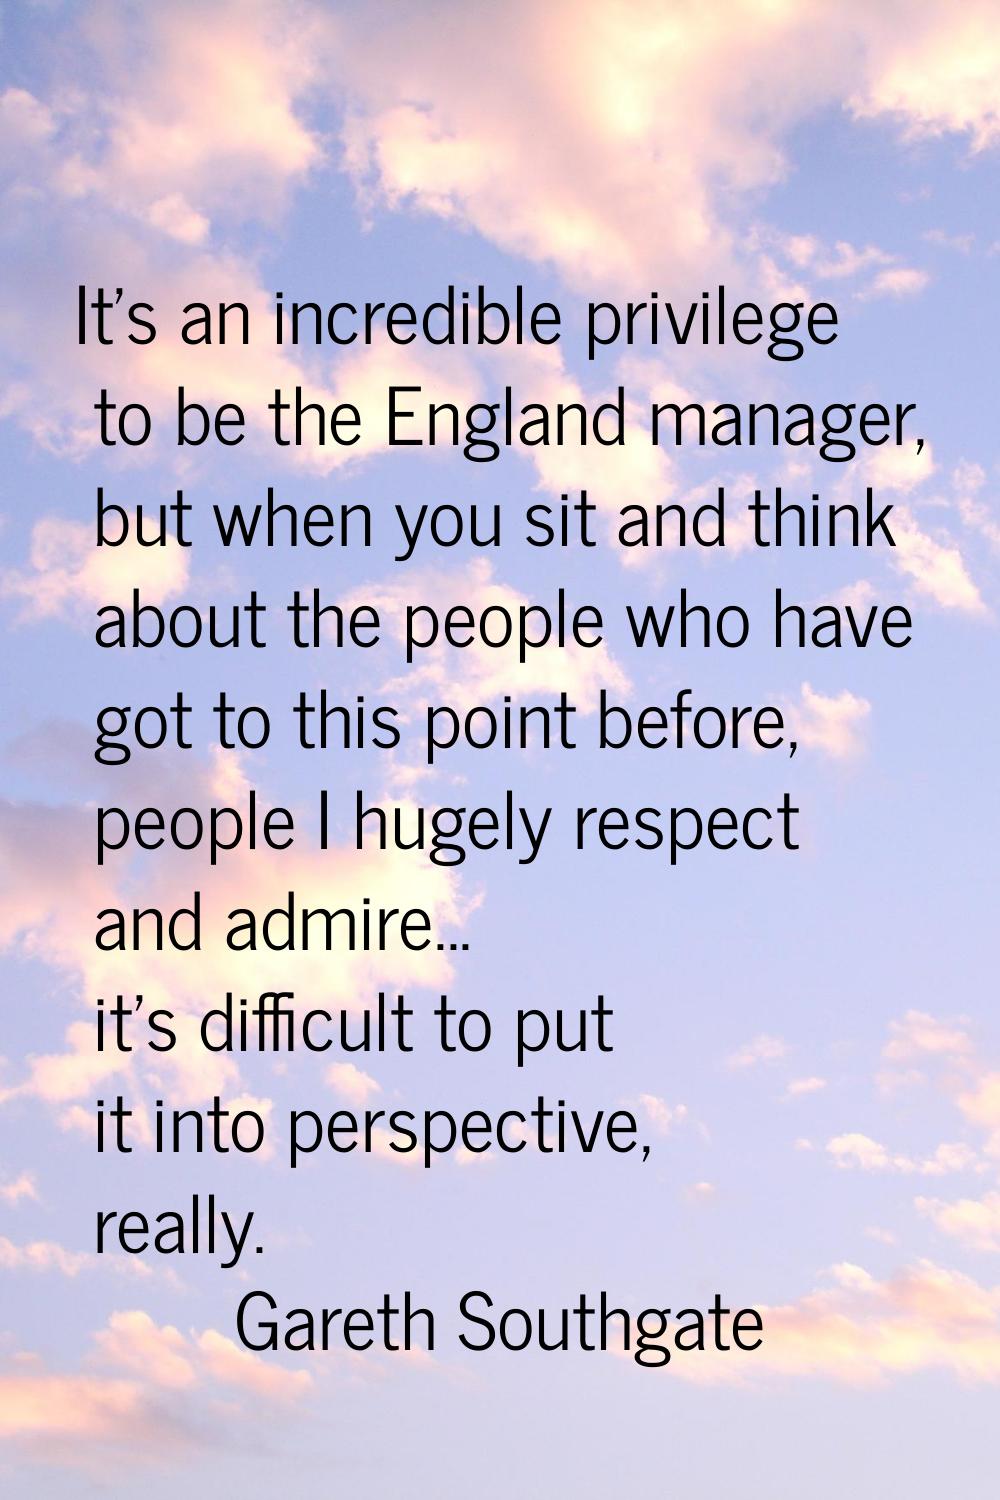 It's an incredible privilege to be the England manager, but when you sit and think about the people